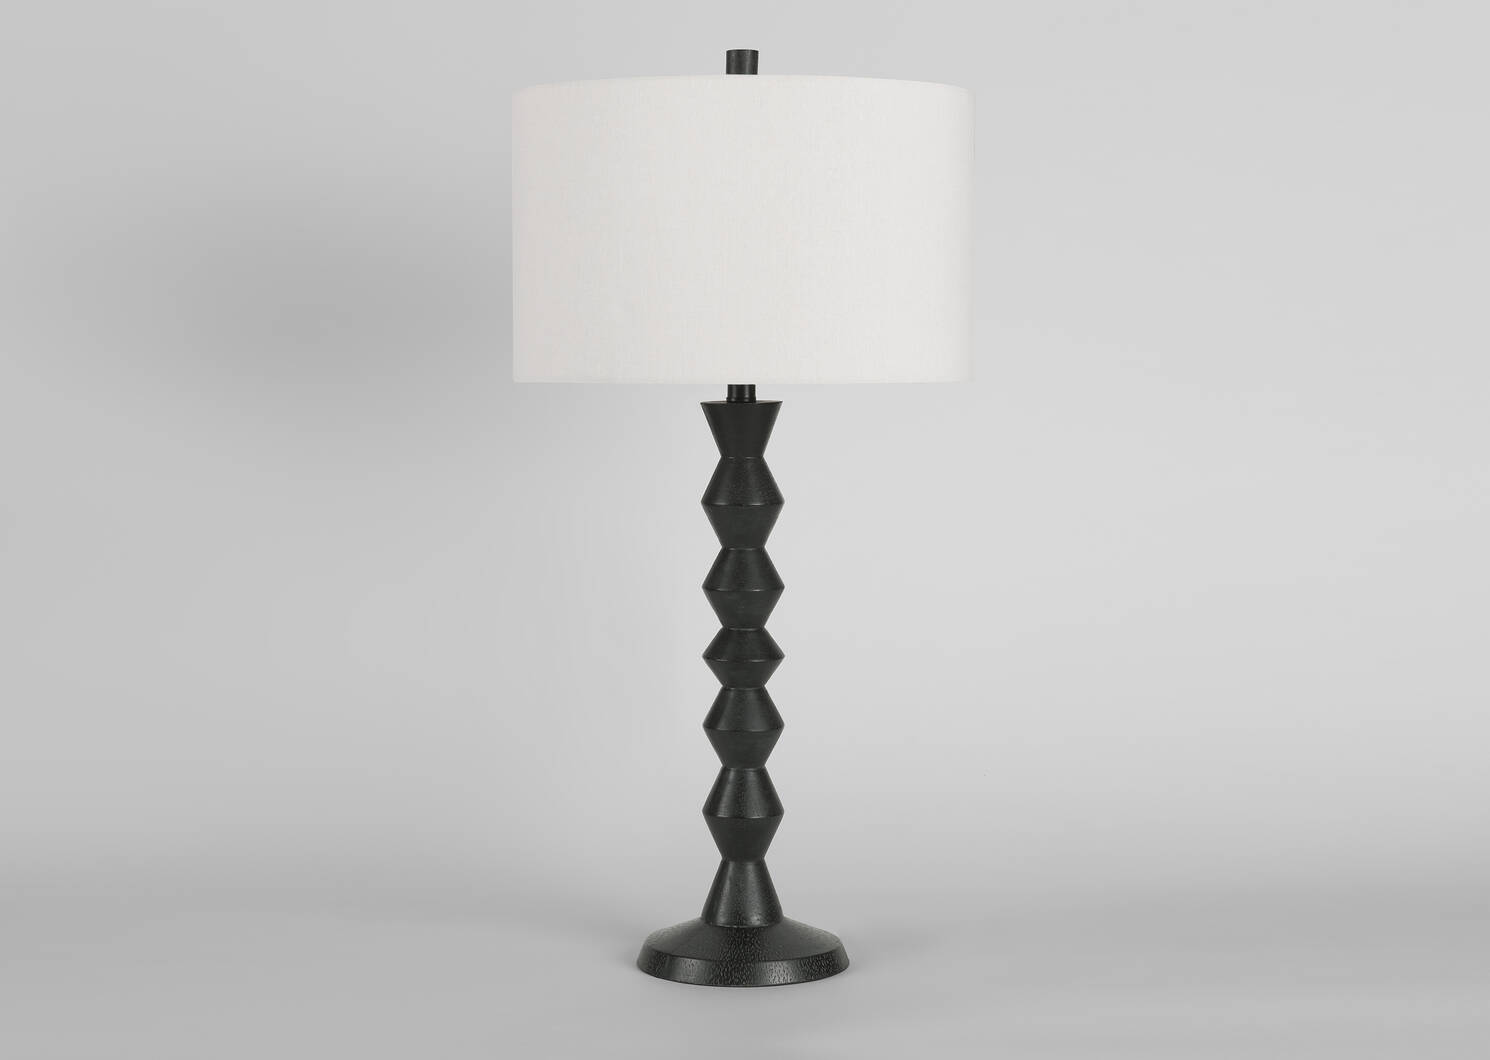 Canora Table Lamp